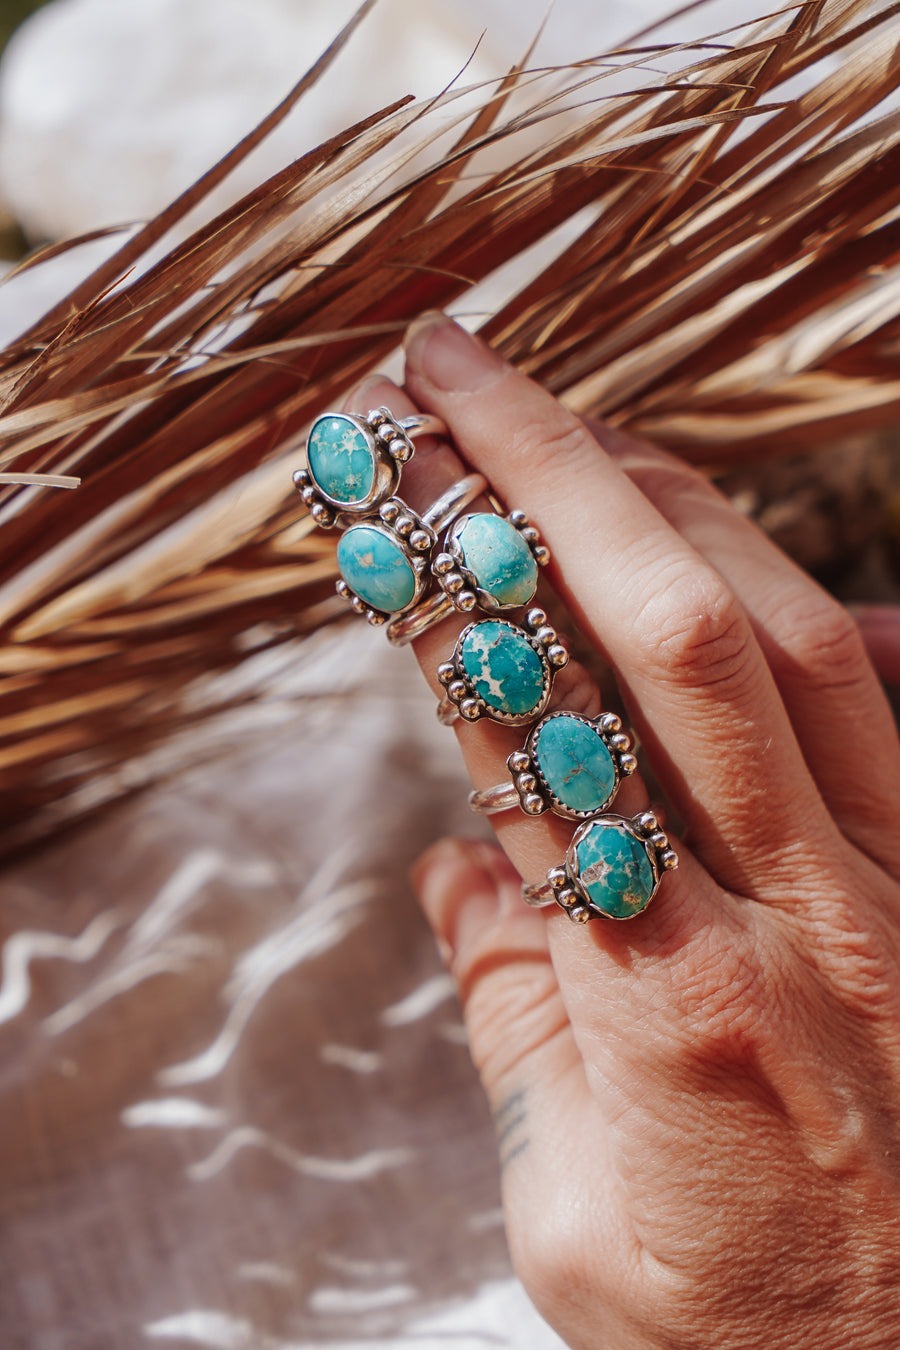 The Ellipsis Ring in Whitewater Turquoise (Size 6.5)